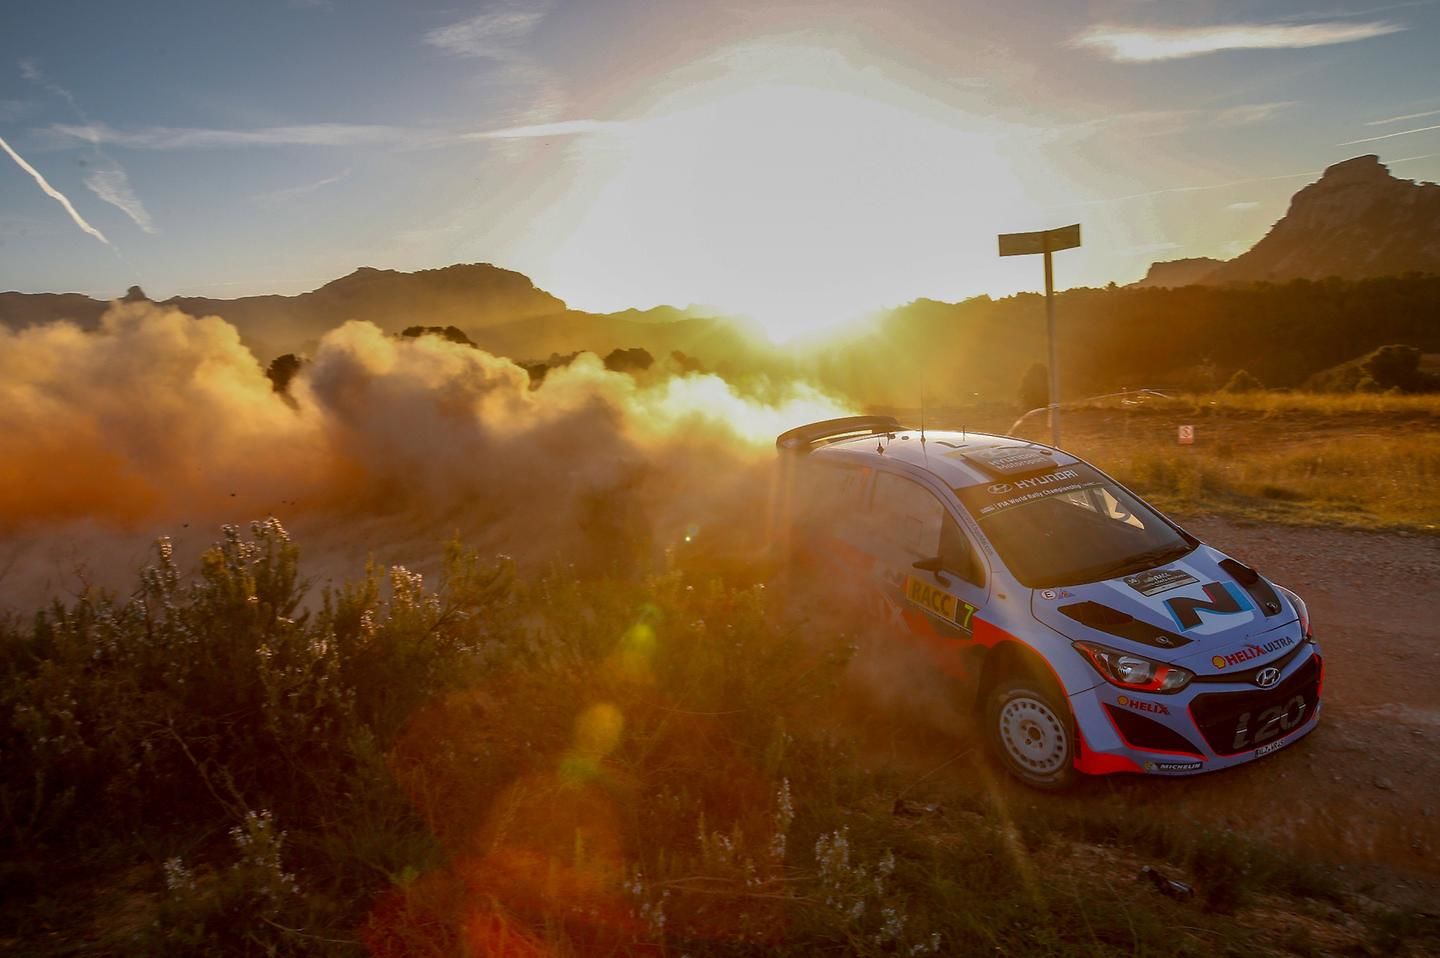 Hyundai Motor UK is Once Again The Official Car Partner to Wales Rally GB